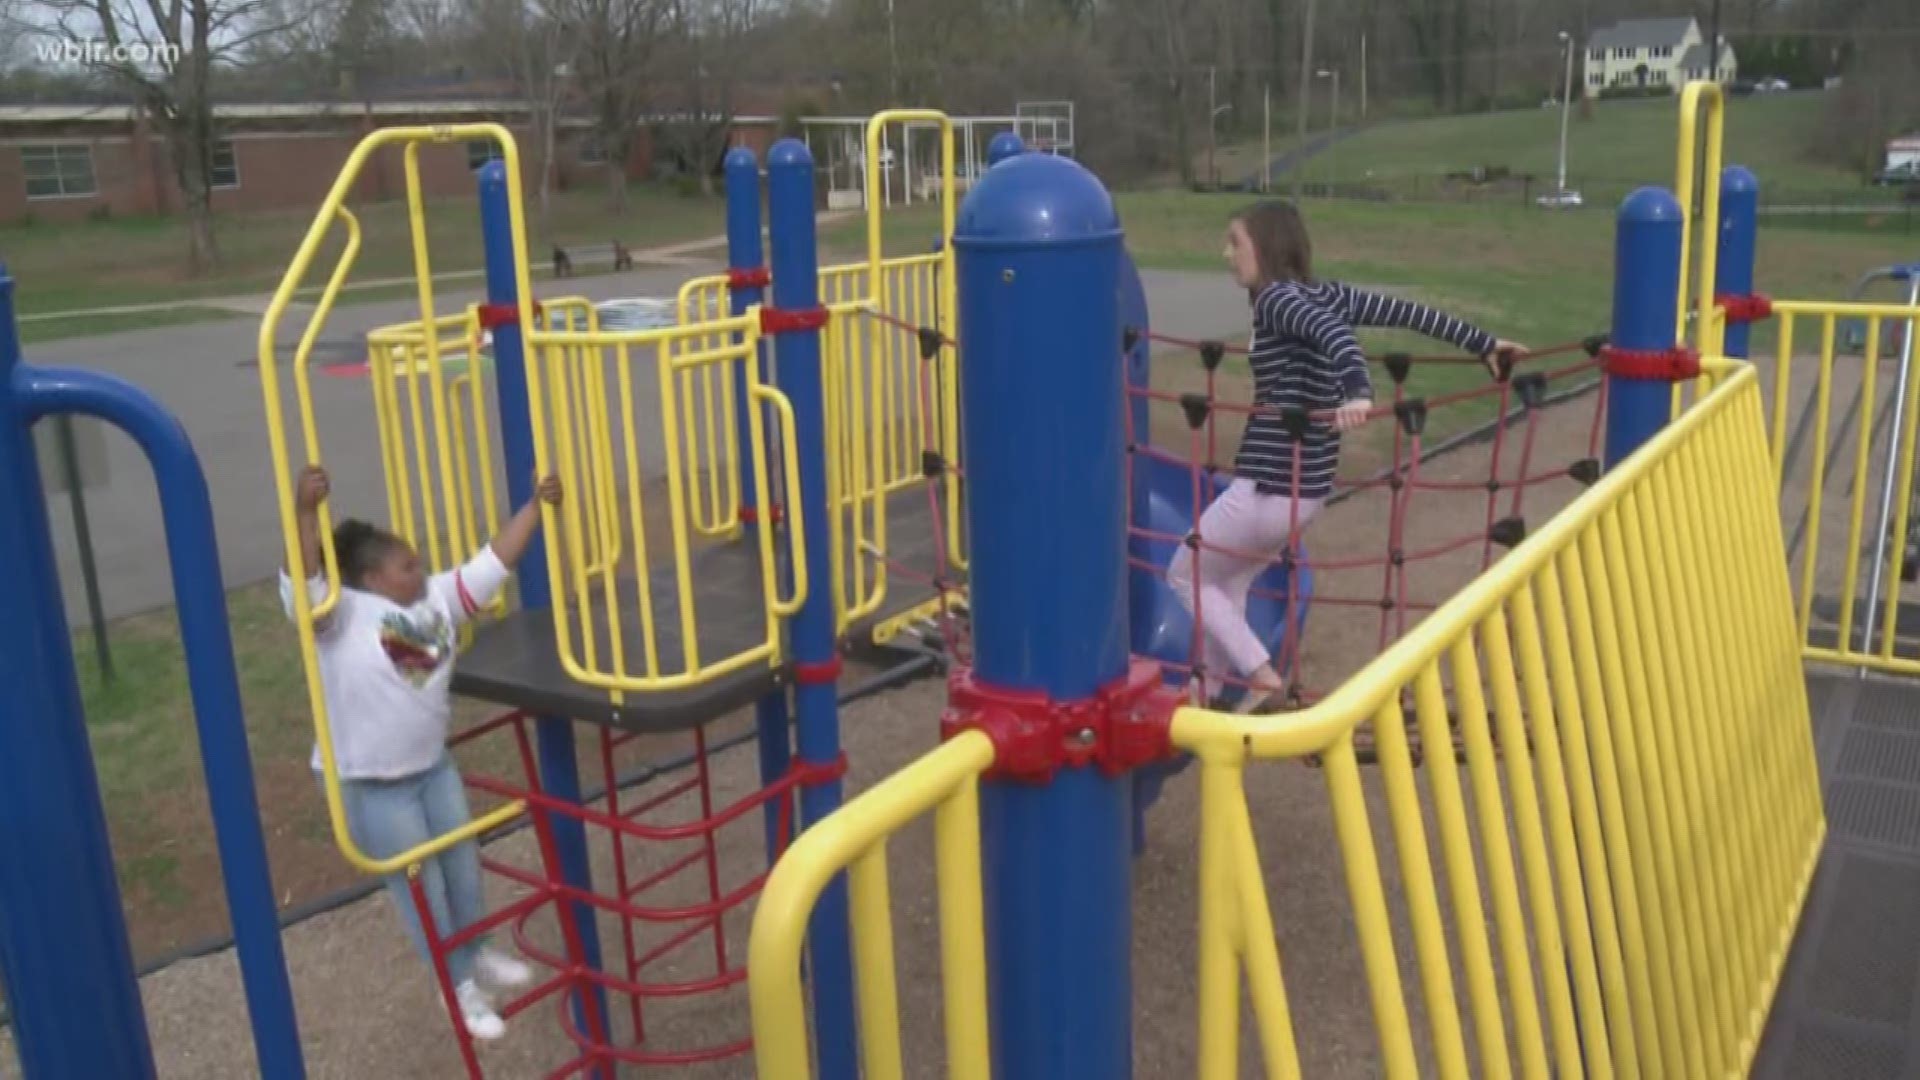 On the playground outside her school, Josheiana feels right at home with her big sister, and Kristy Dubose instantly feels like a kid again. The two were brought together by Big Brothers Big Sisters in Knoxville.